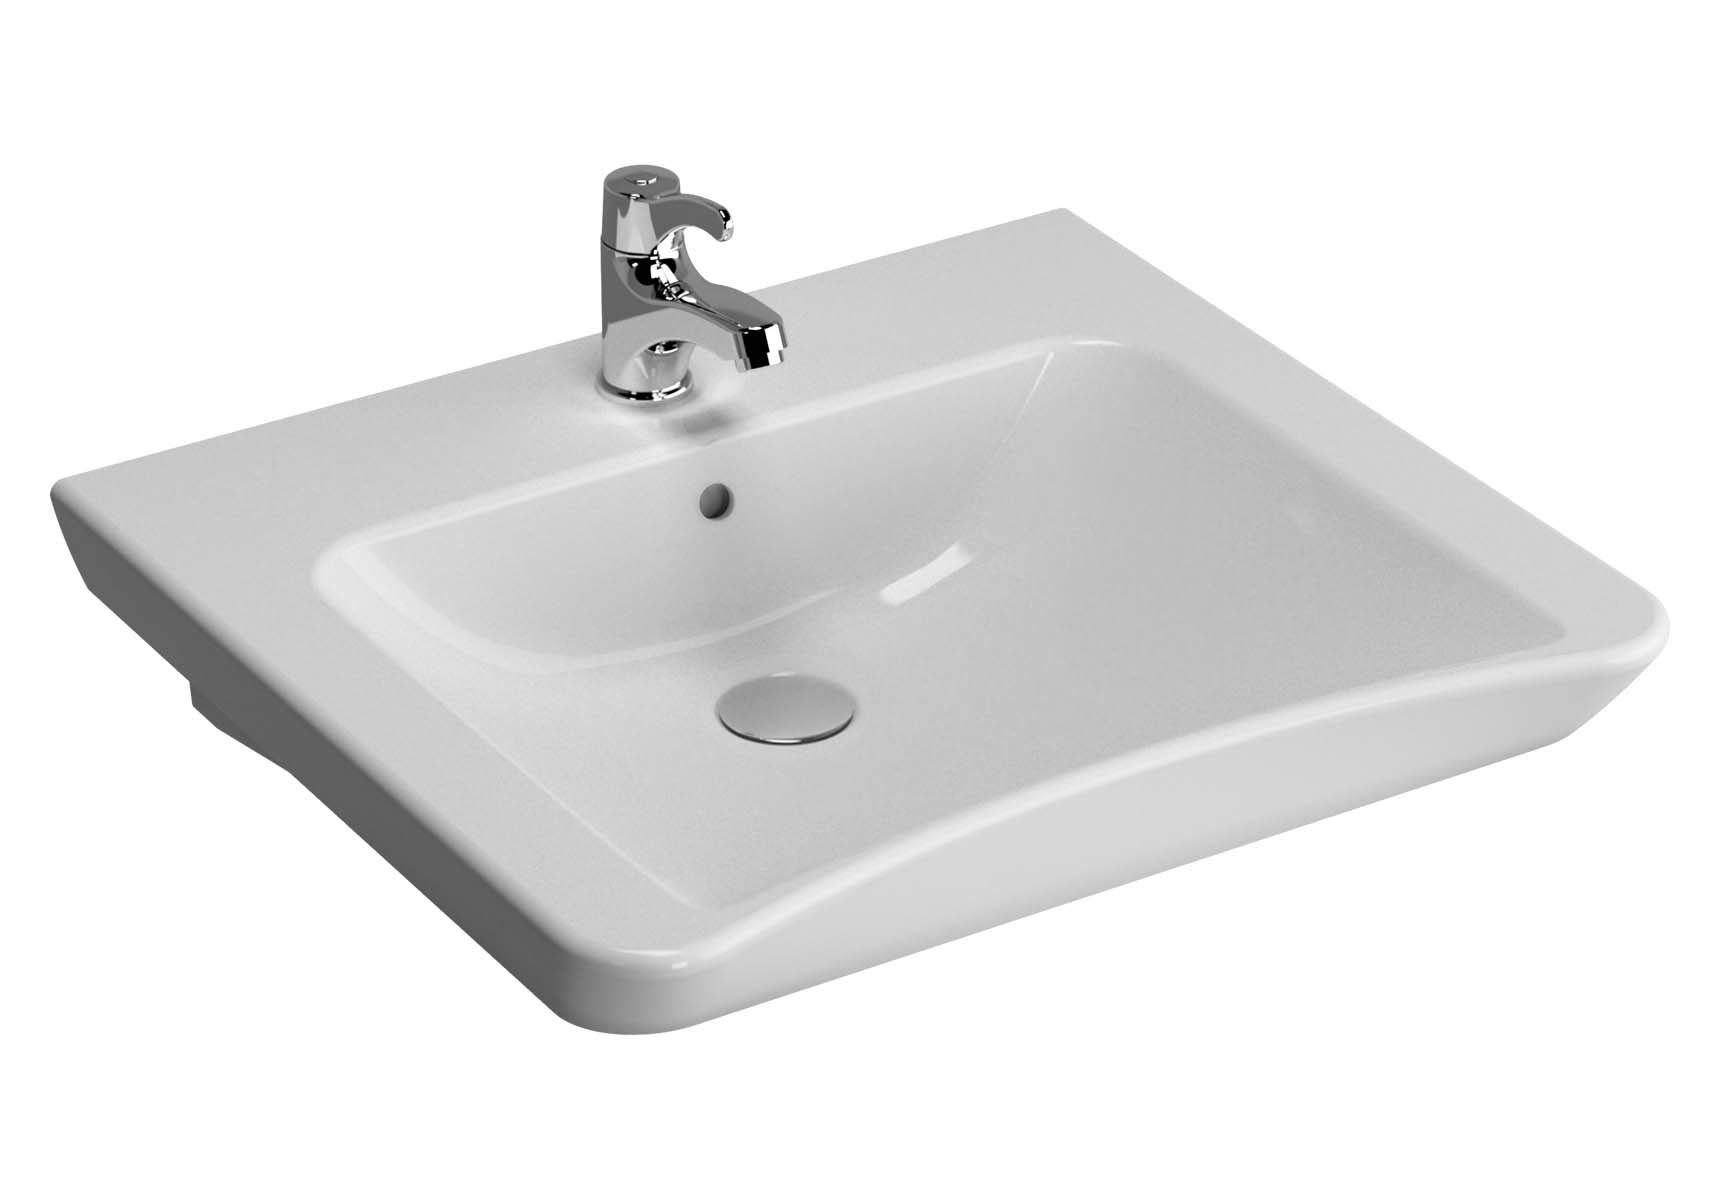 S20 Special Needs Basin, 60cm